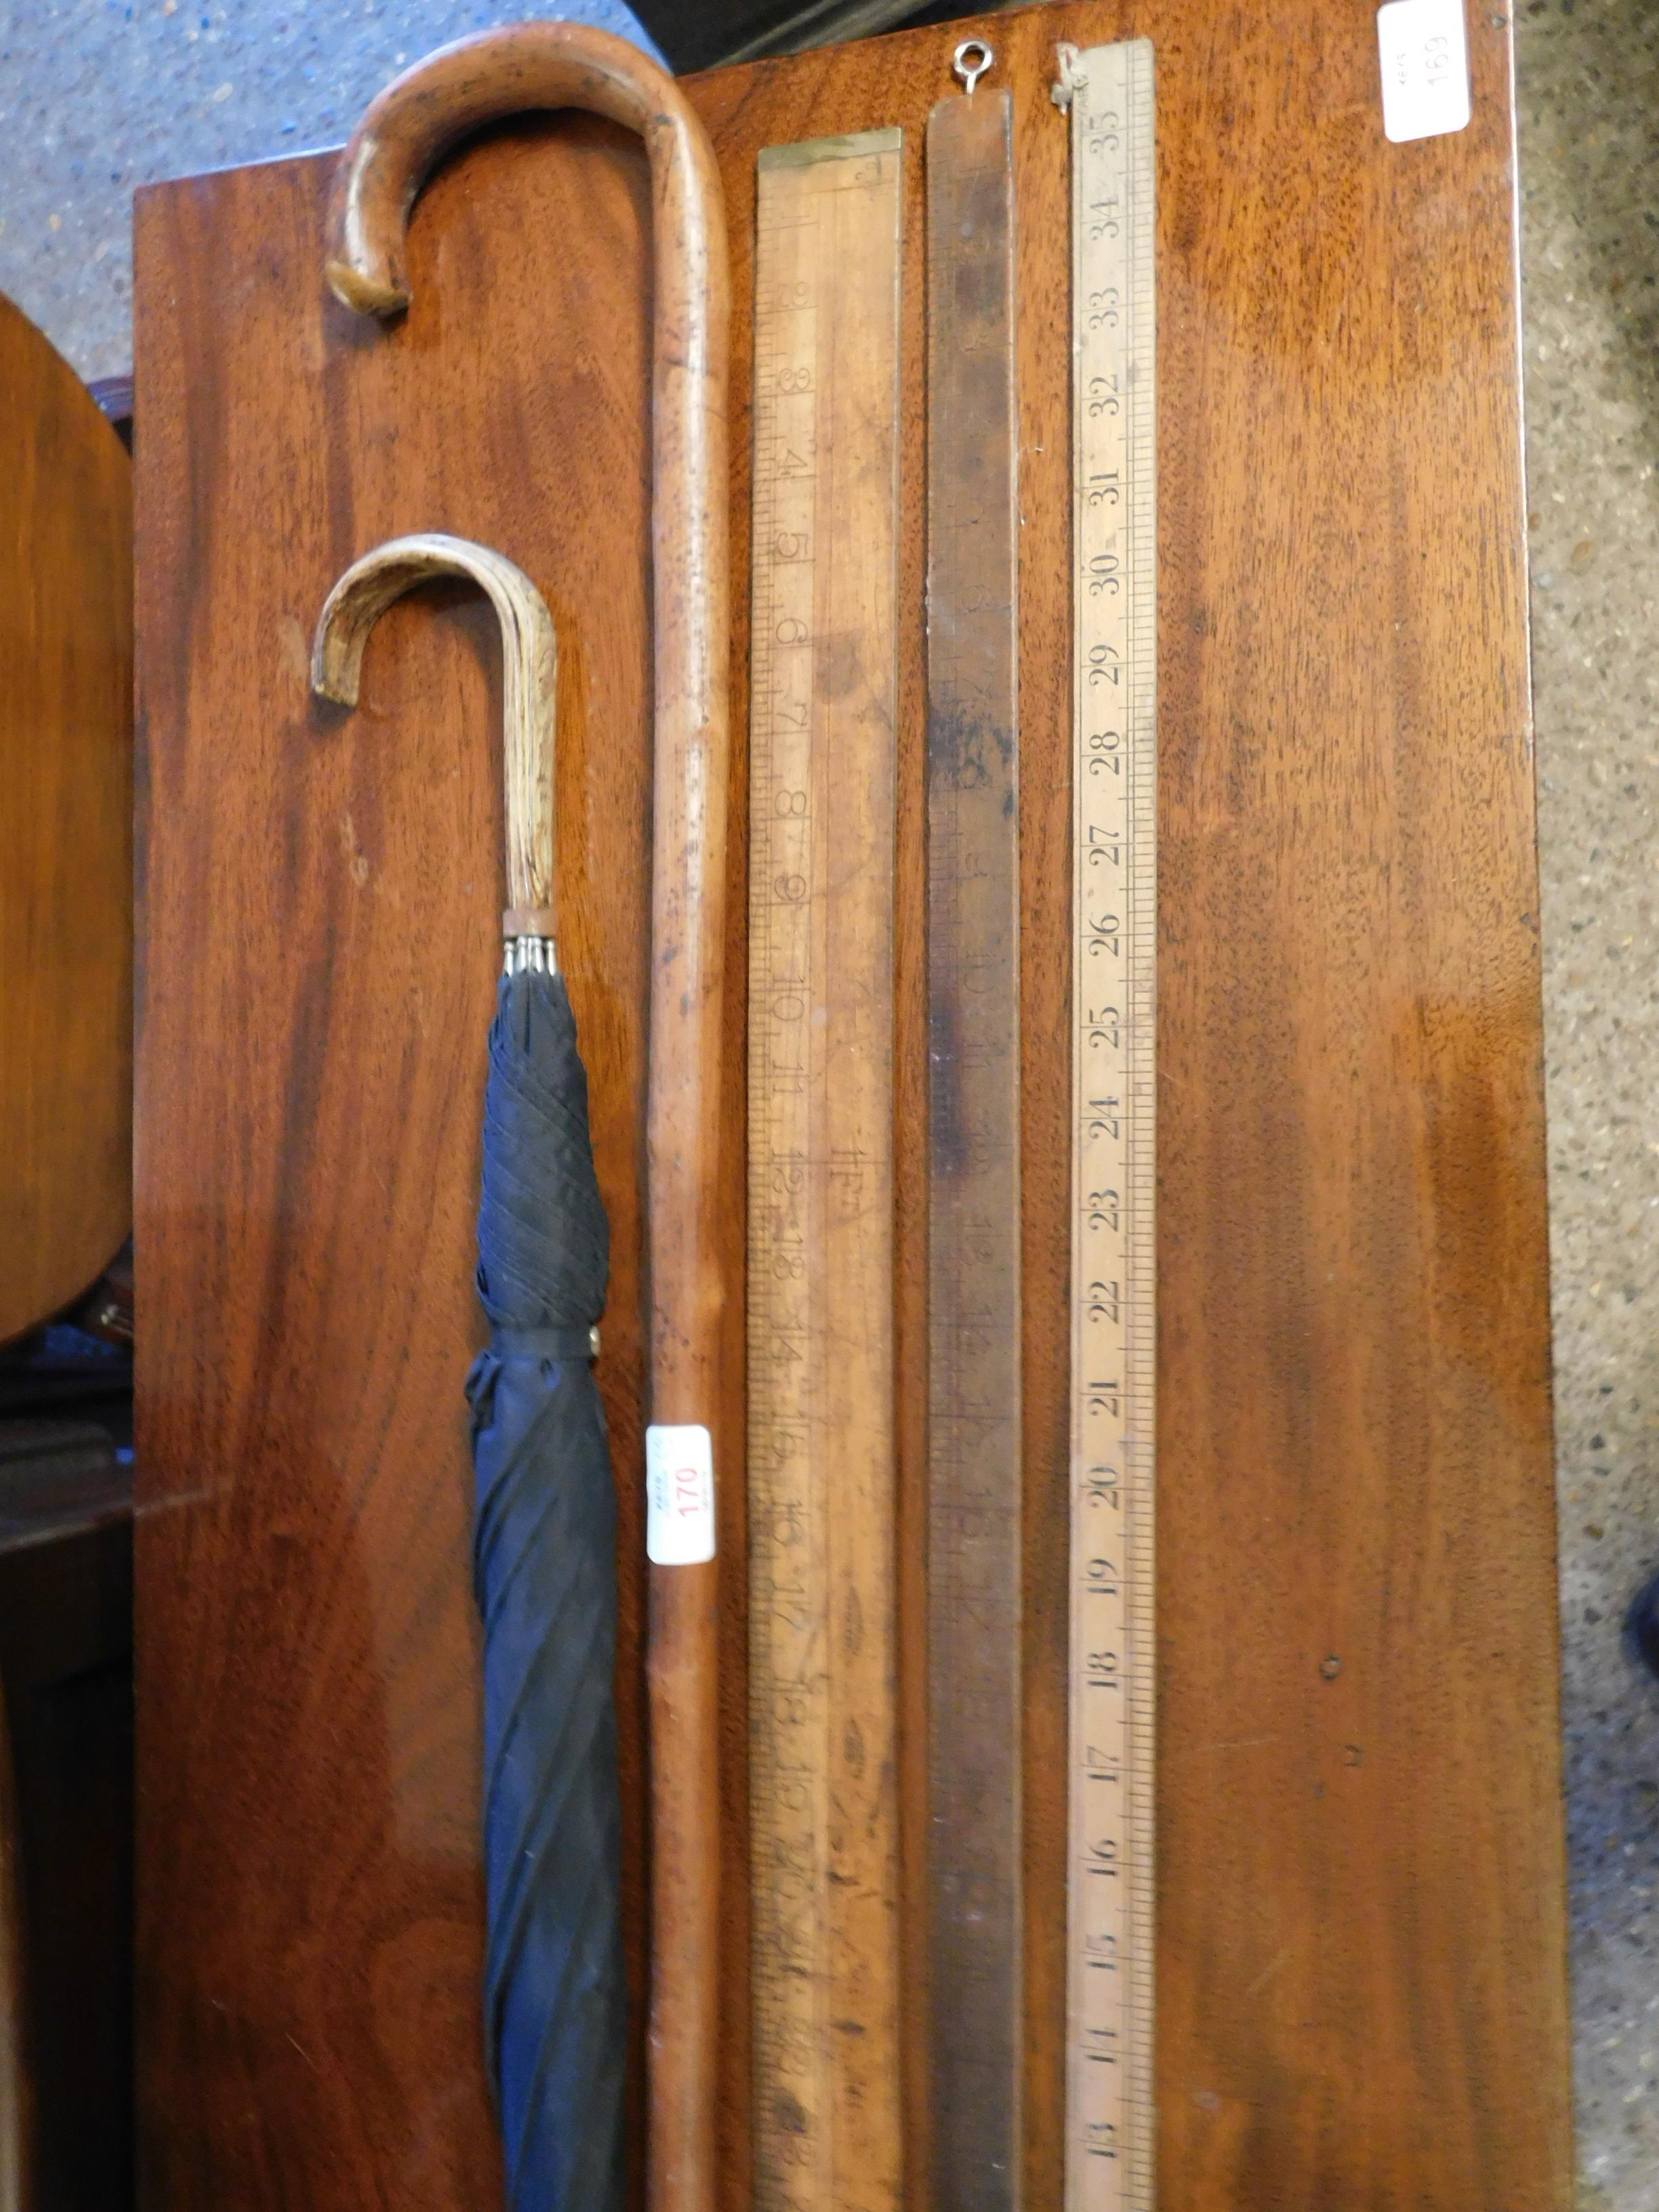 TWO WOODEN RULERS, AN UMBRELLA AND A WALKING STICK